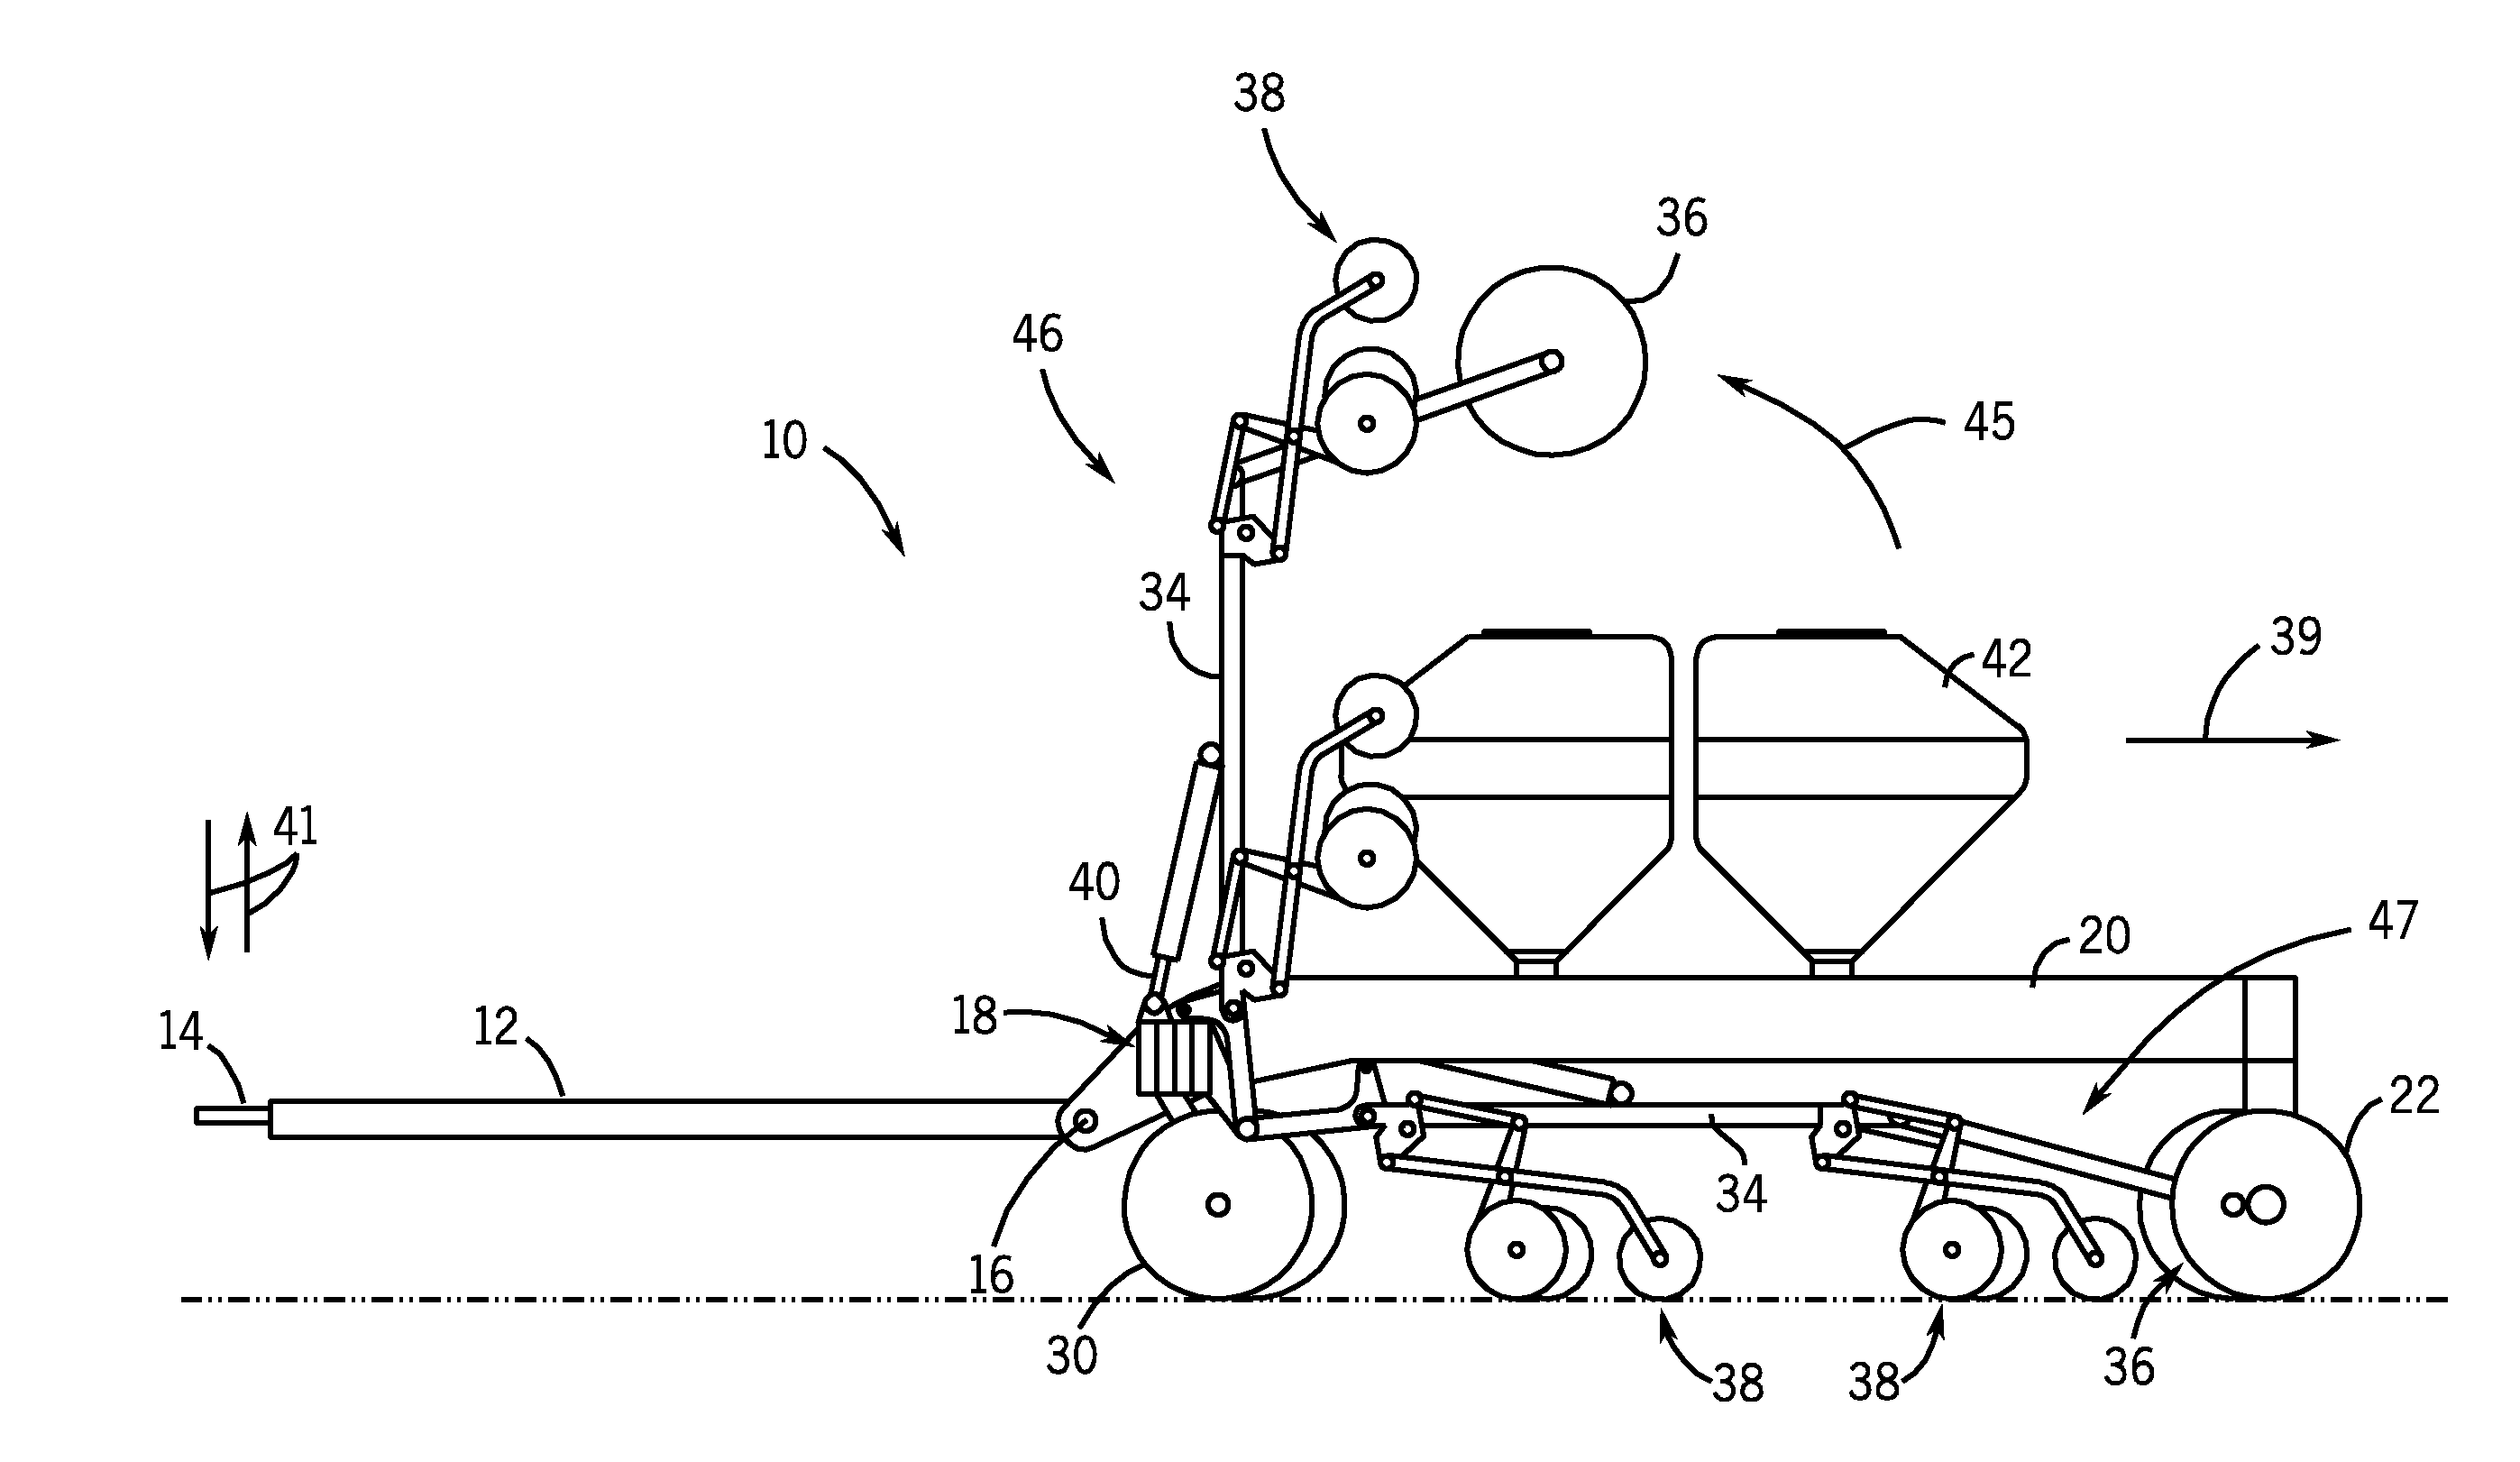 Boom stabilization method for narrow transport implement